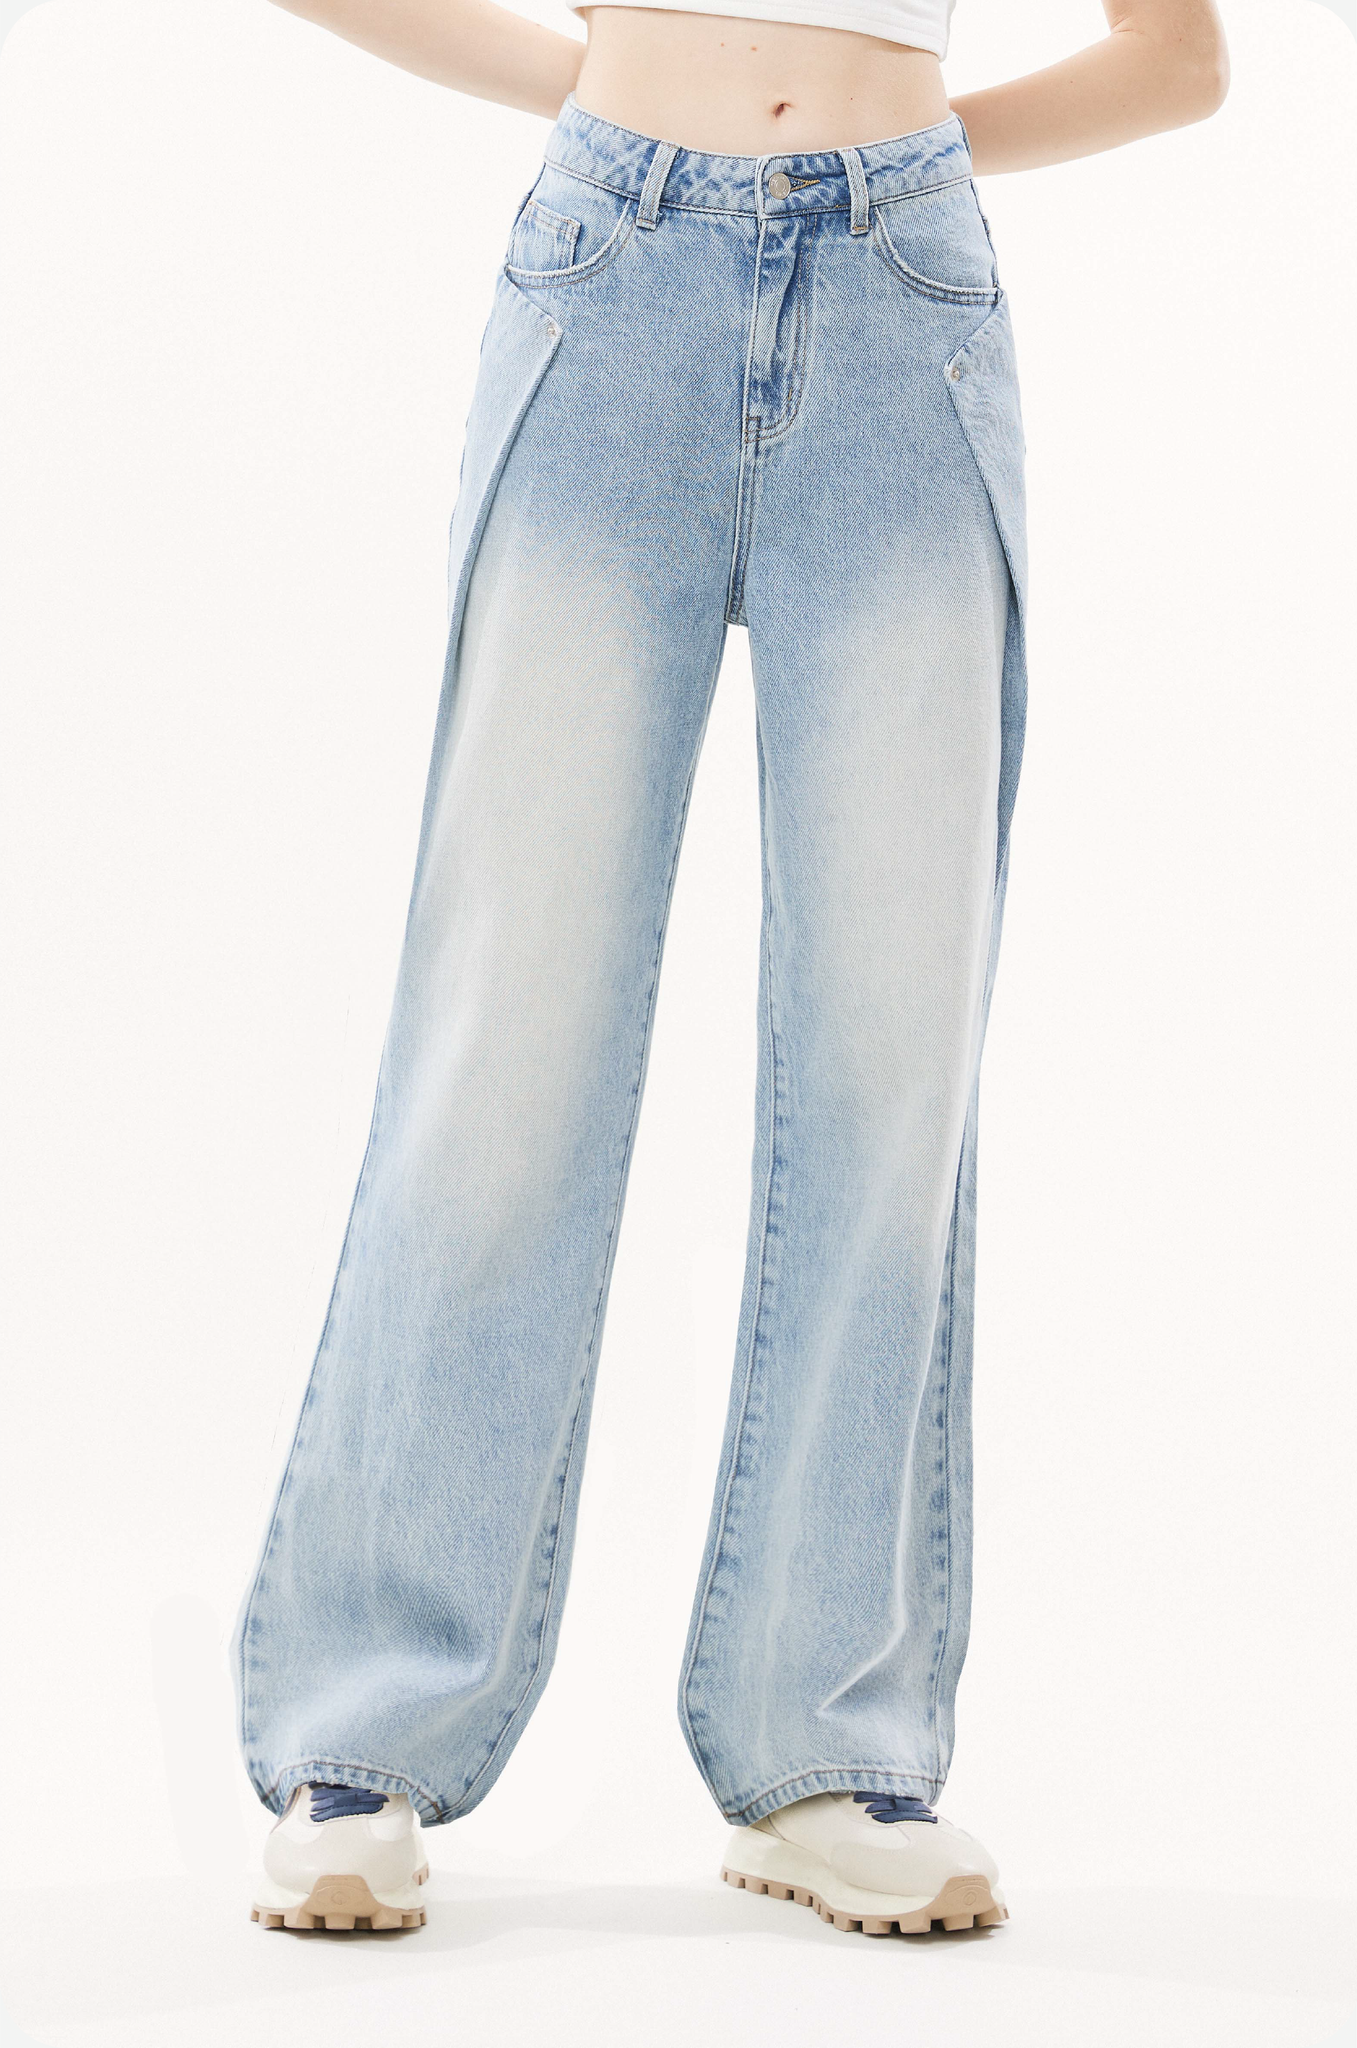 Straight Cut Jeans With Side Seam Design